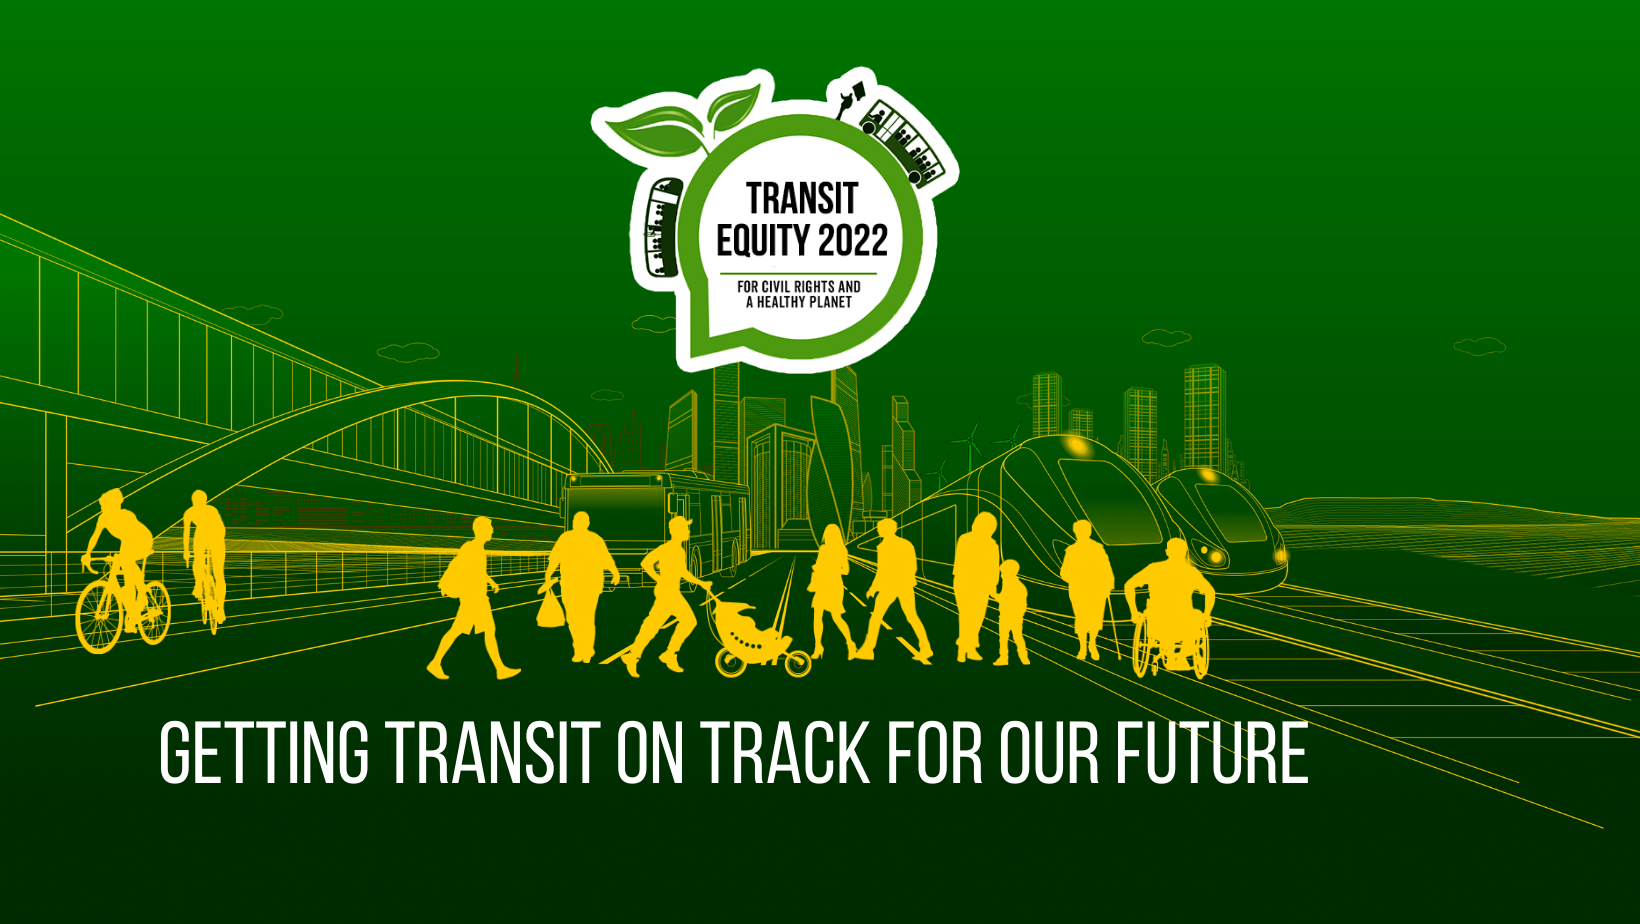 a graphic with green background depicting a sustainable, walkable city with pedestrians and public transit in yellow, with white text that says "getting transit on track for our future"